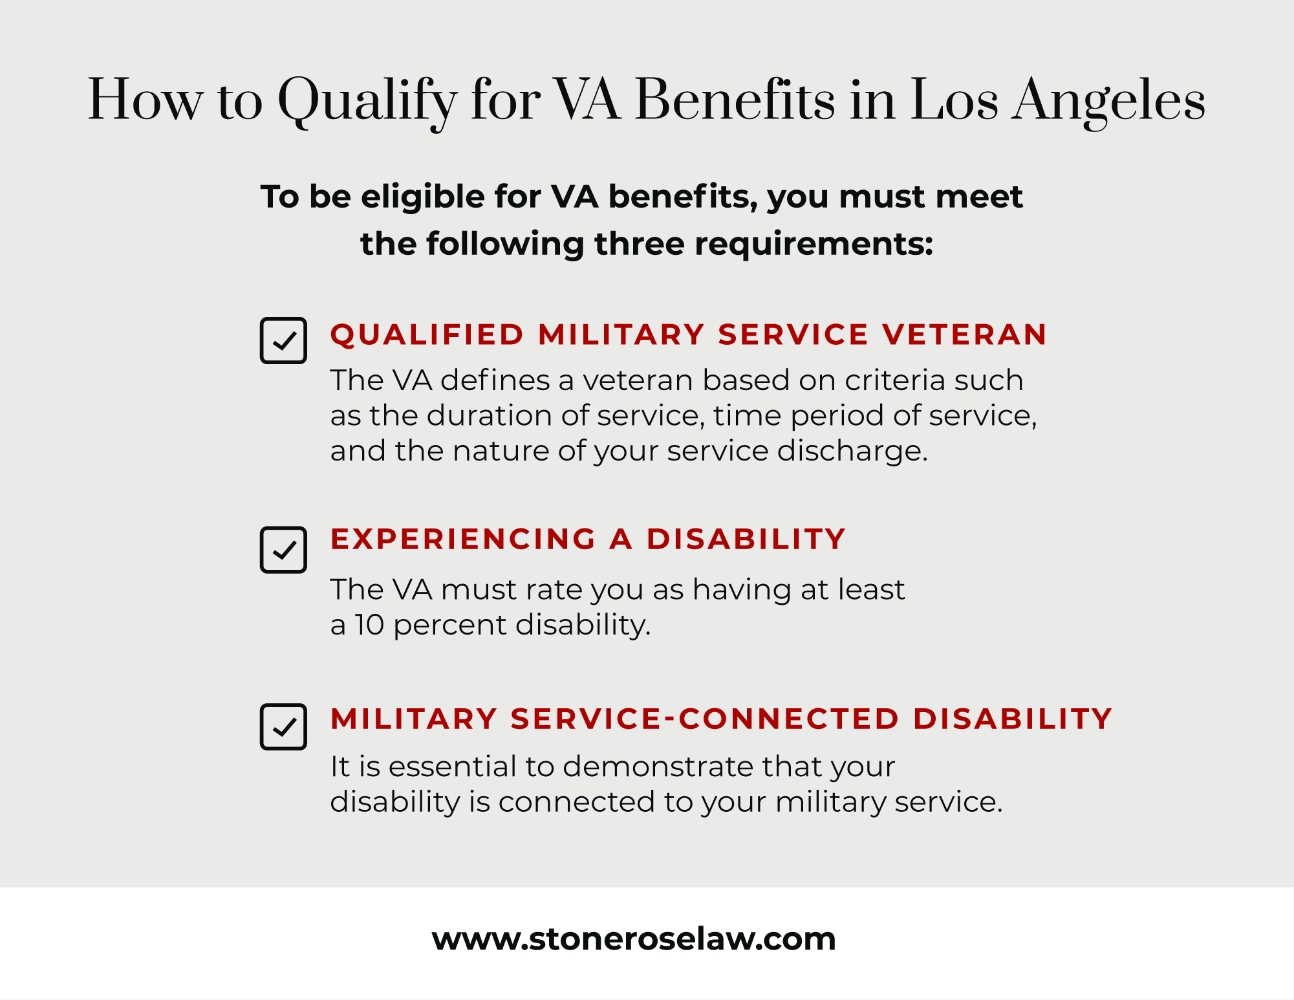 How to qualify for VA benefits in Los Angeles